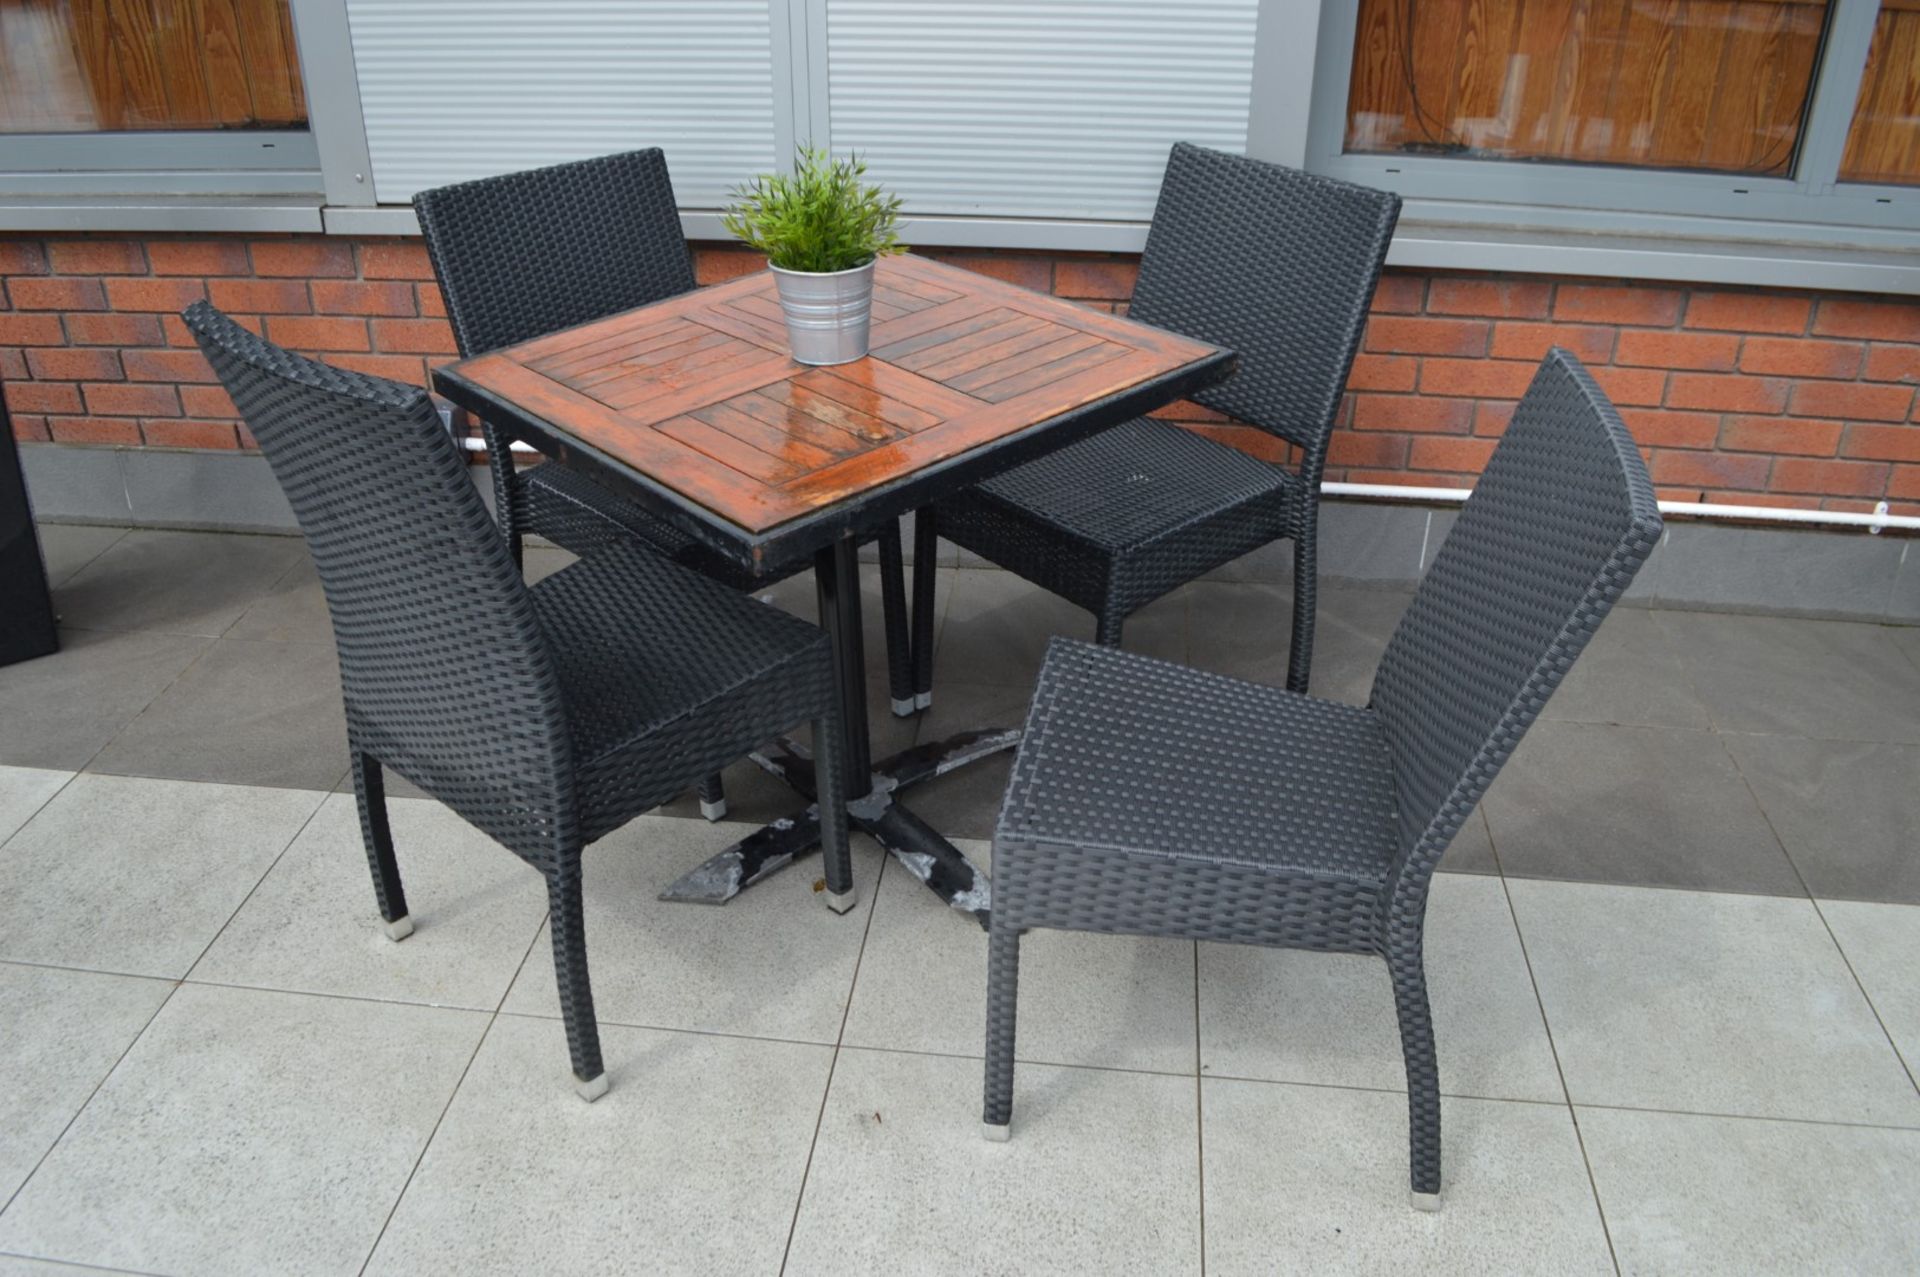 1 x Outdoor Garden Table With Four Charcoal Rattan Chairs - H72 x W74 x D74 cms - CL357 - - Image 3 of 3